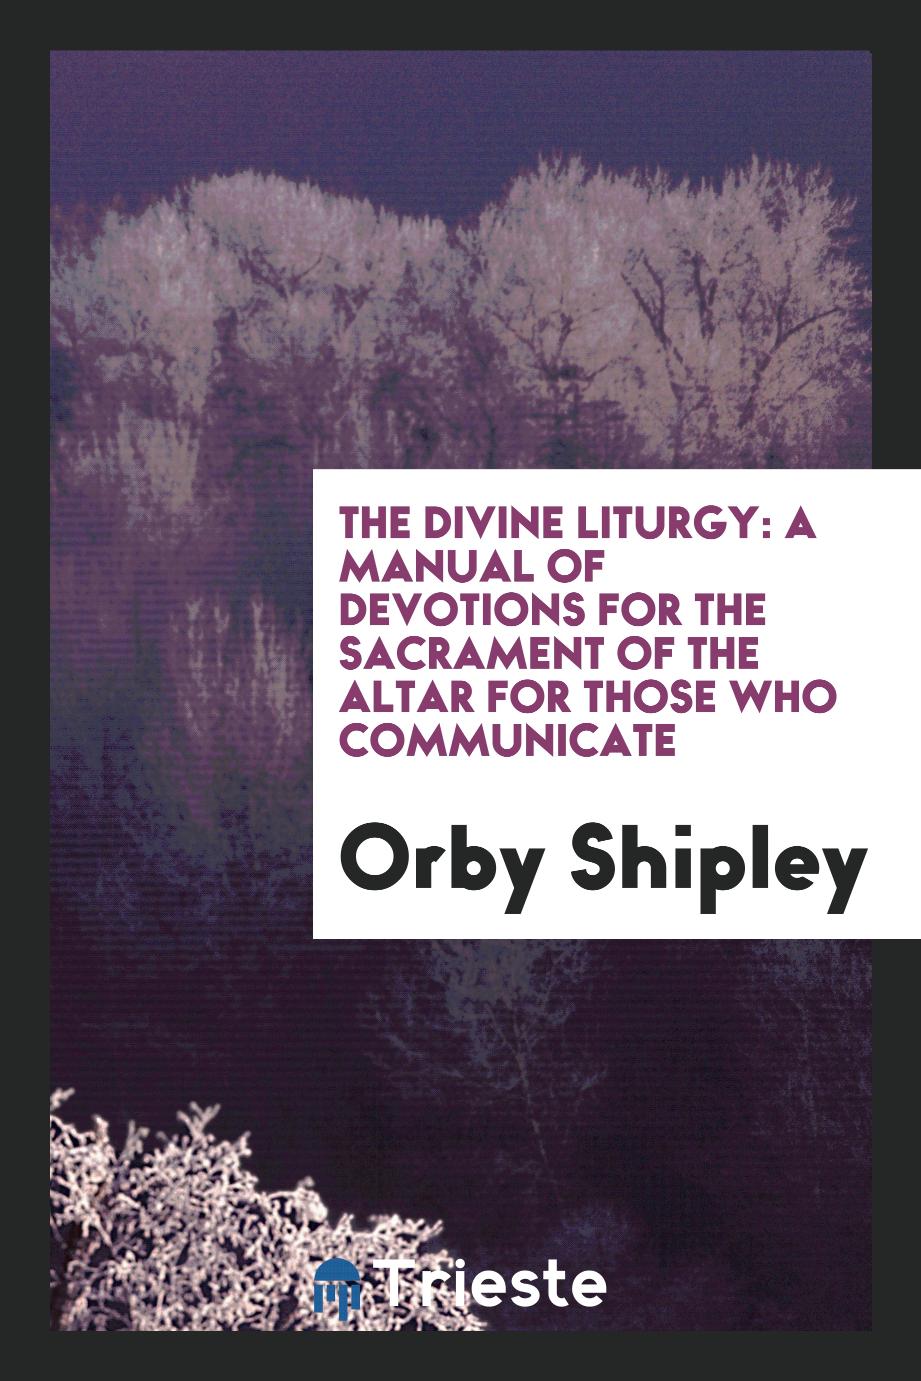 The Divine Liturgy: A Manual of Devotions for the Sacrament of the Altar for Those Who Communicate